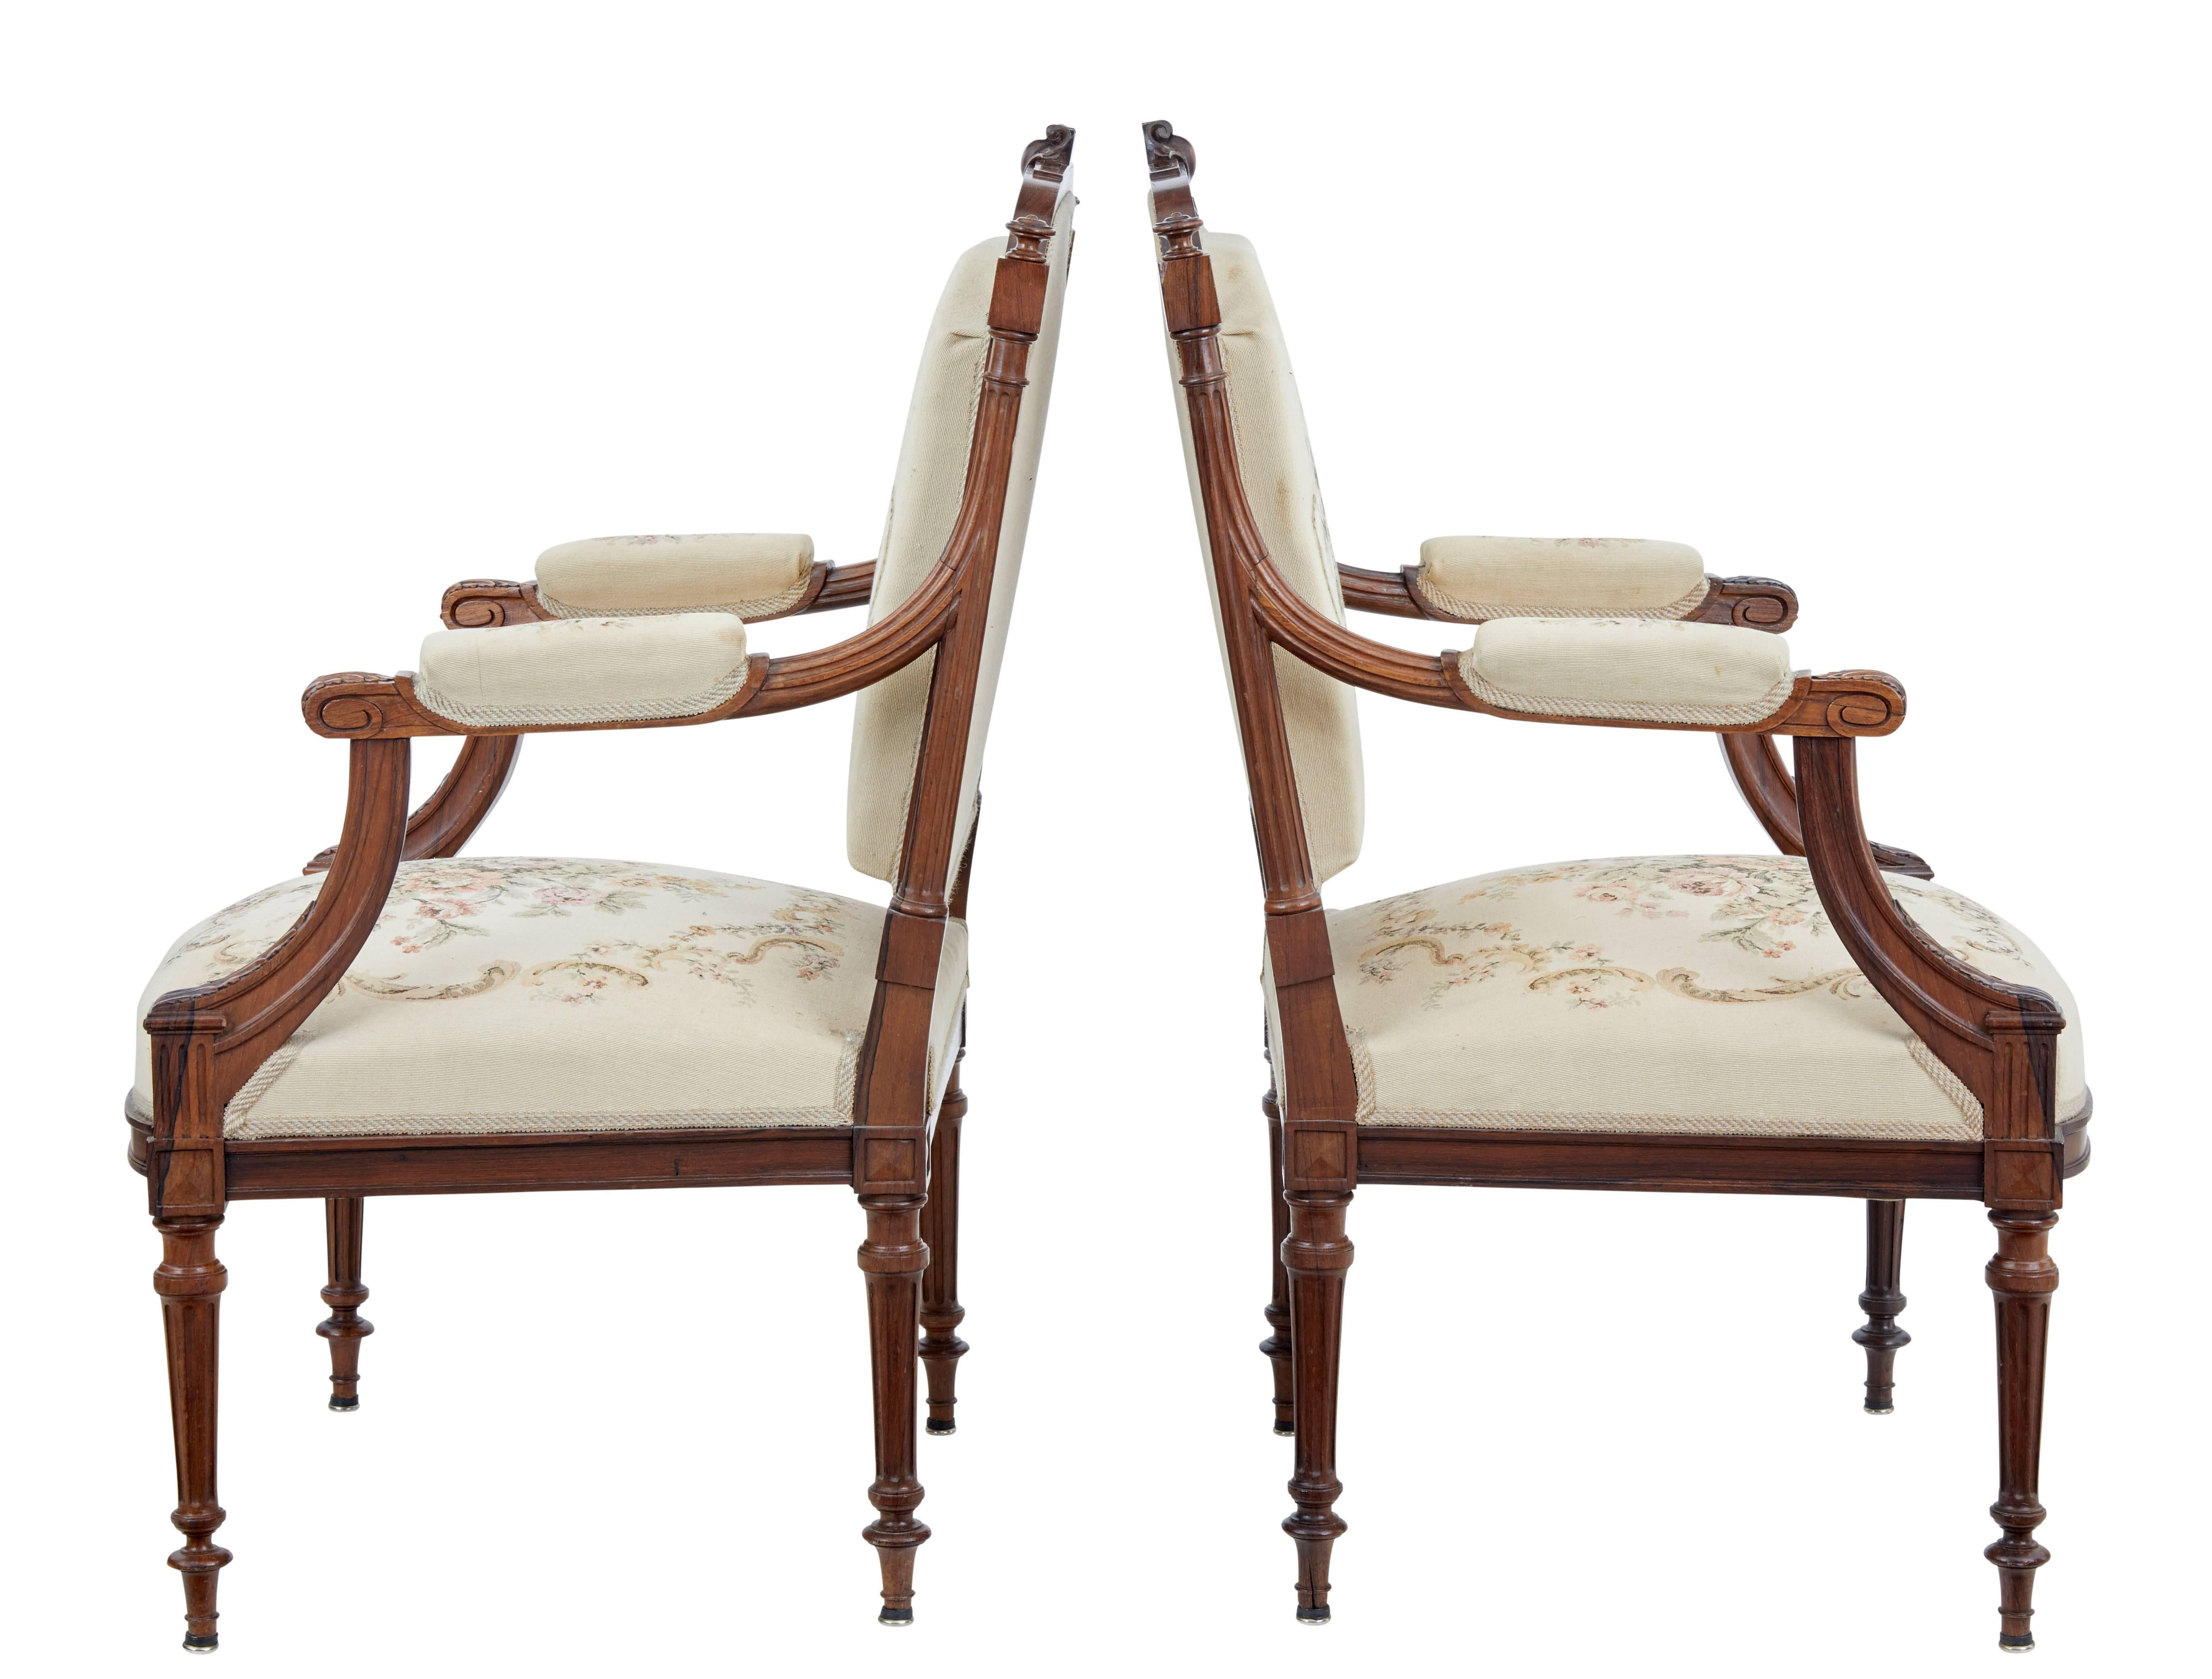 Good quality pair of French rosewood and walnut armchairs, circa 1890.

Heavy sturdy chairs due to the nature of the timber used, but with typical French elegance.

Carved cartouche to the back rest with fluted supports which continue down the